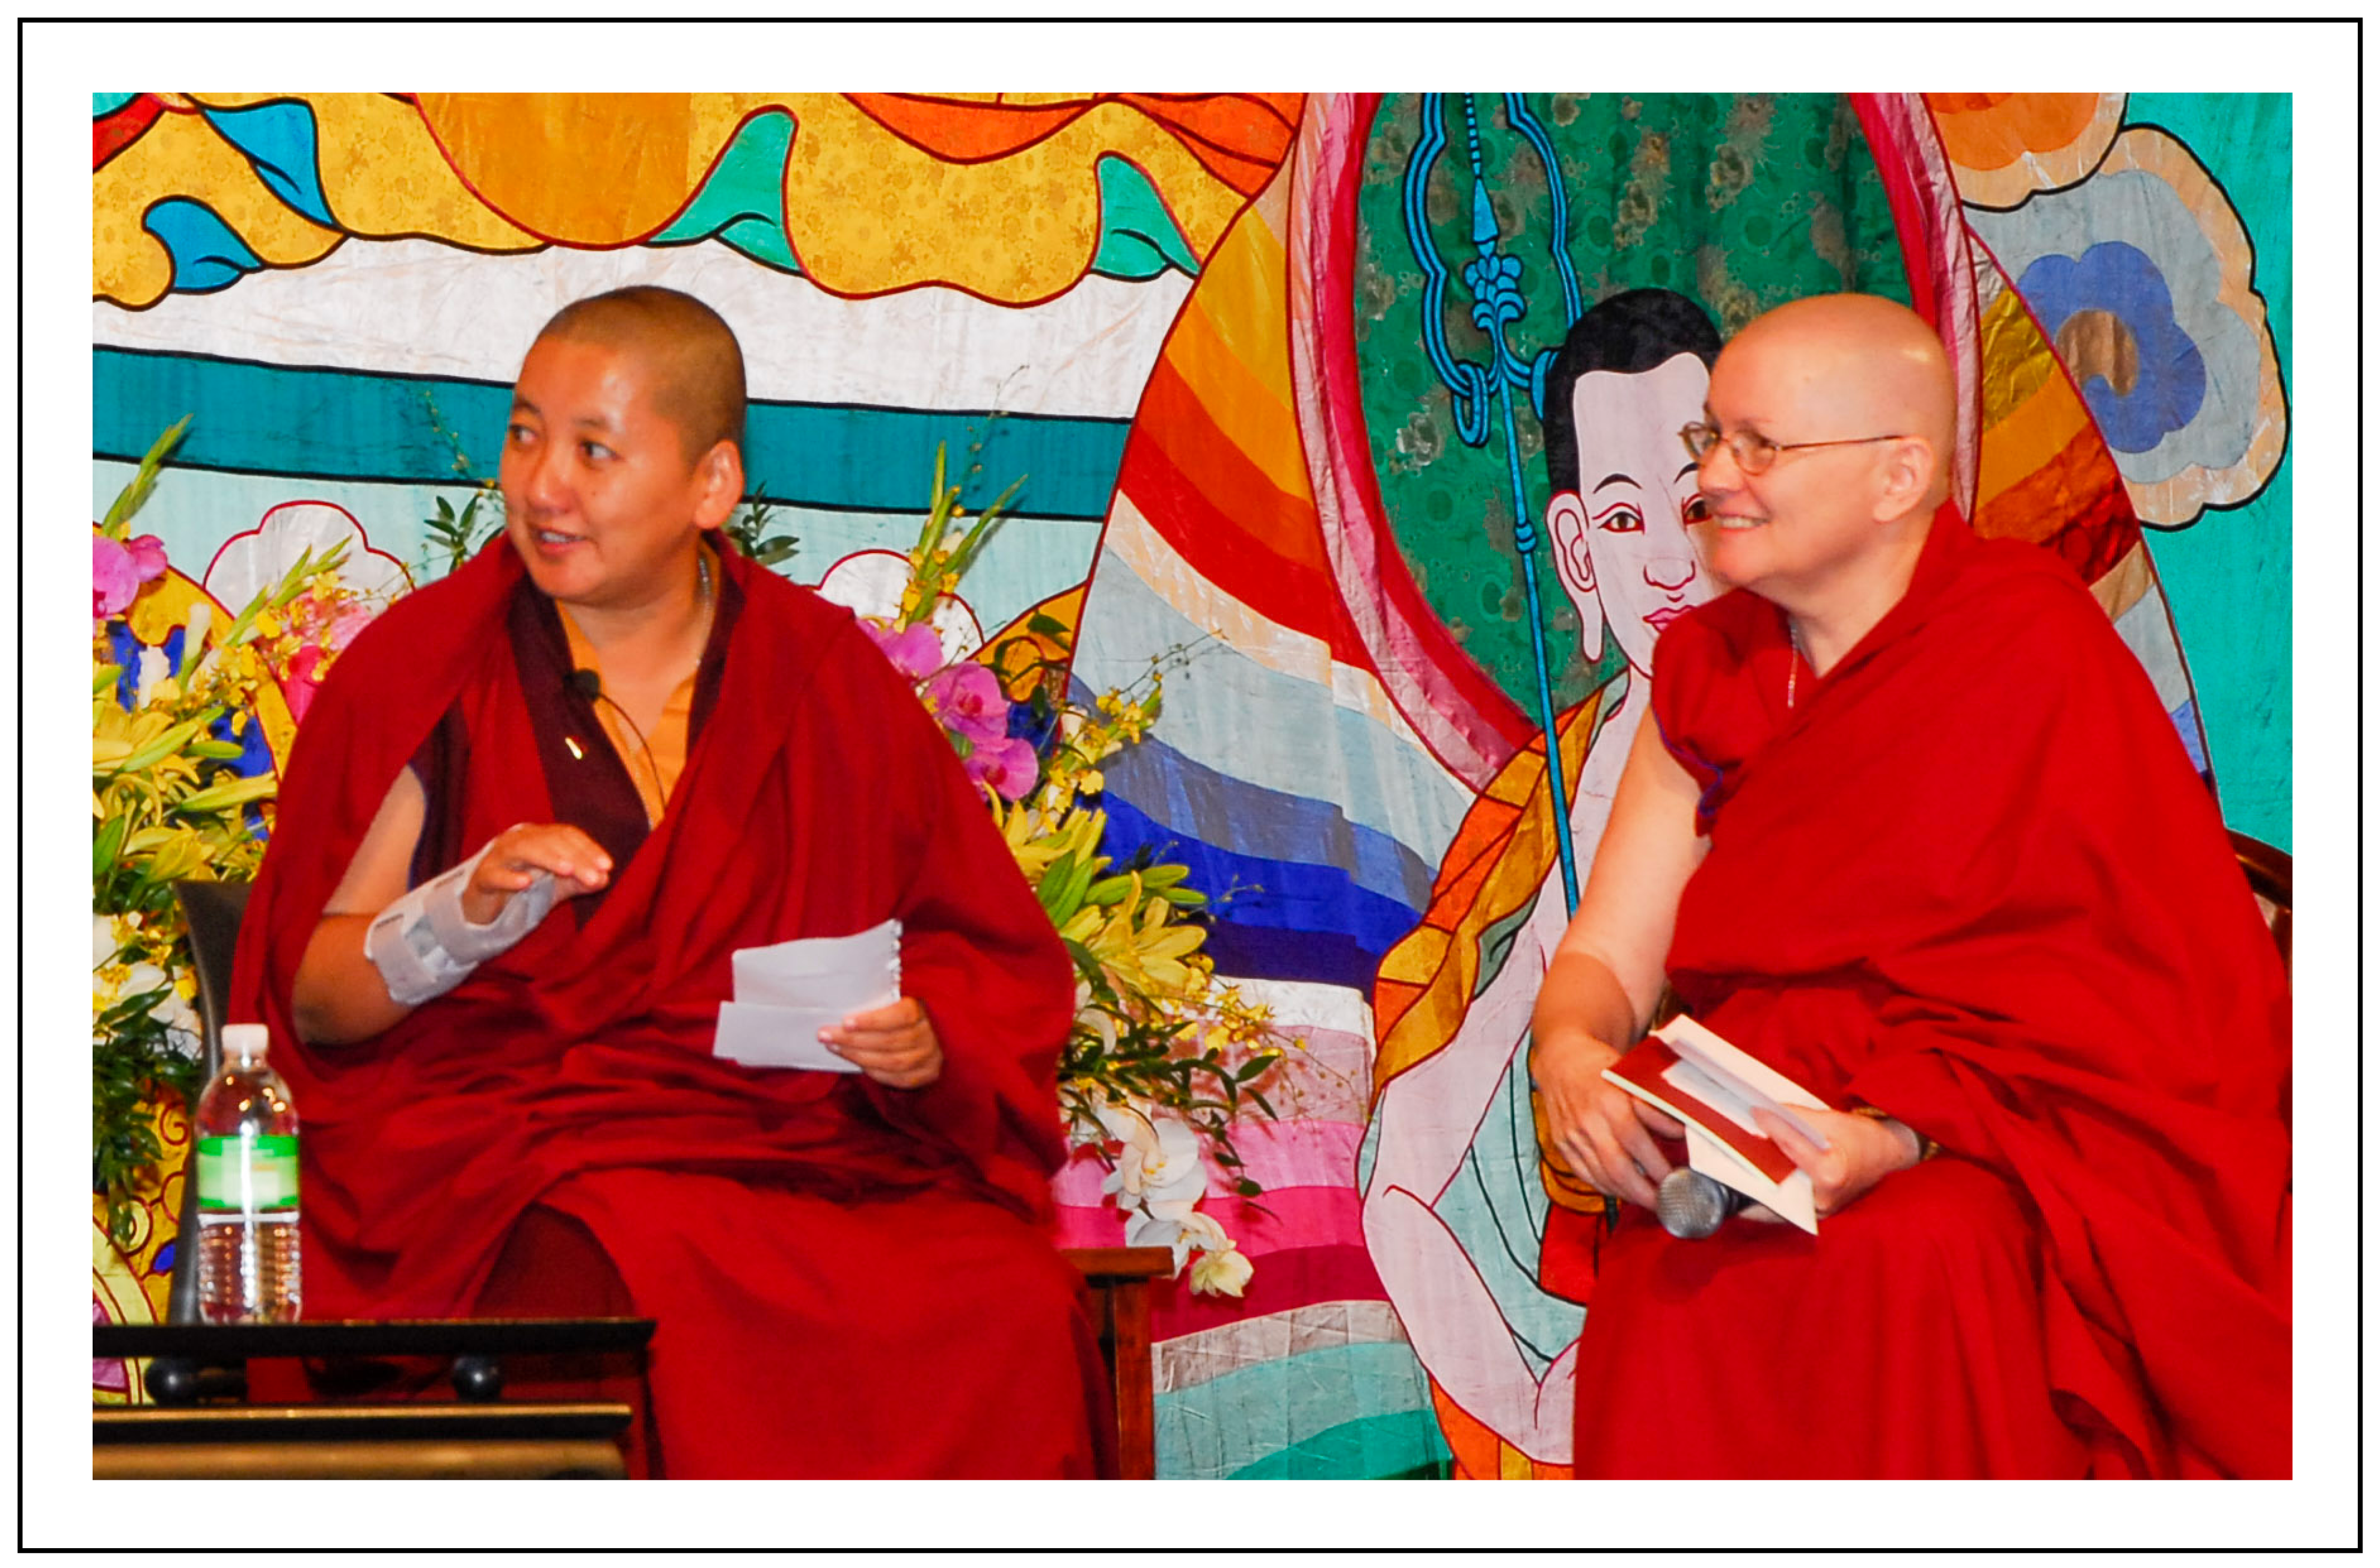 Khandro Rinpoche and Ani Tenzin Lhamo at The Heart of Change